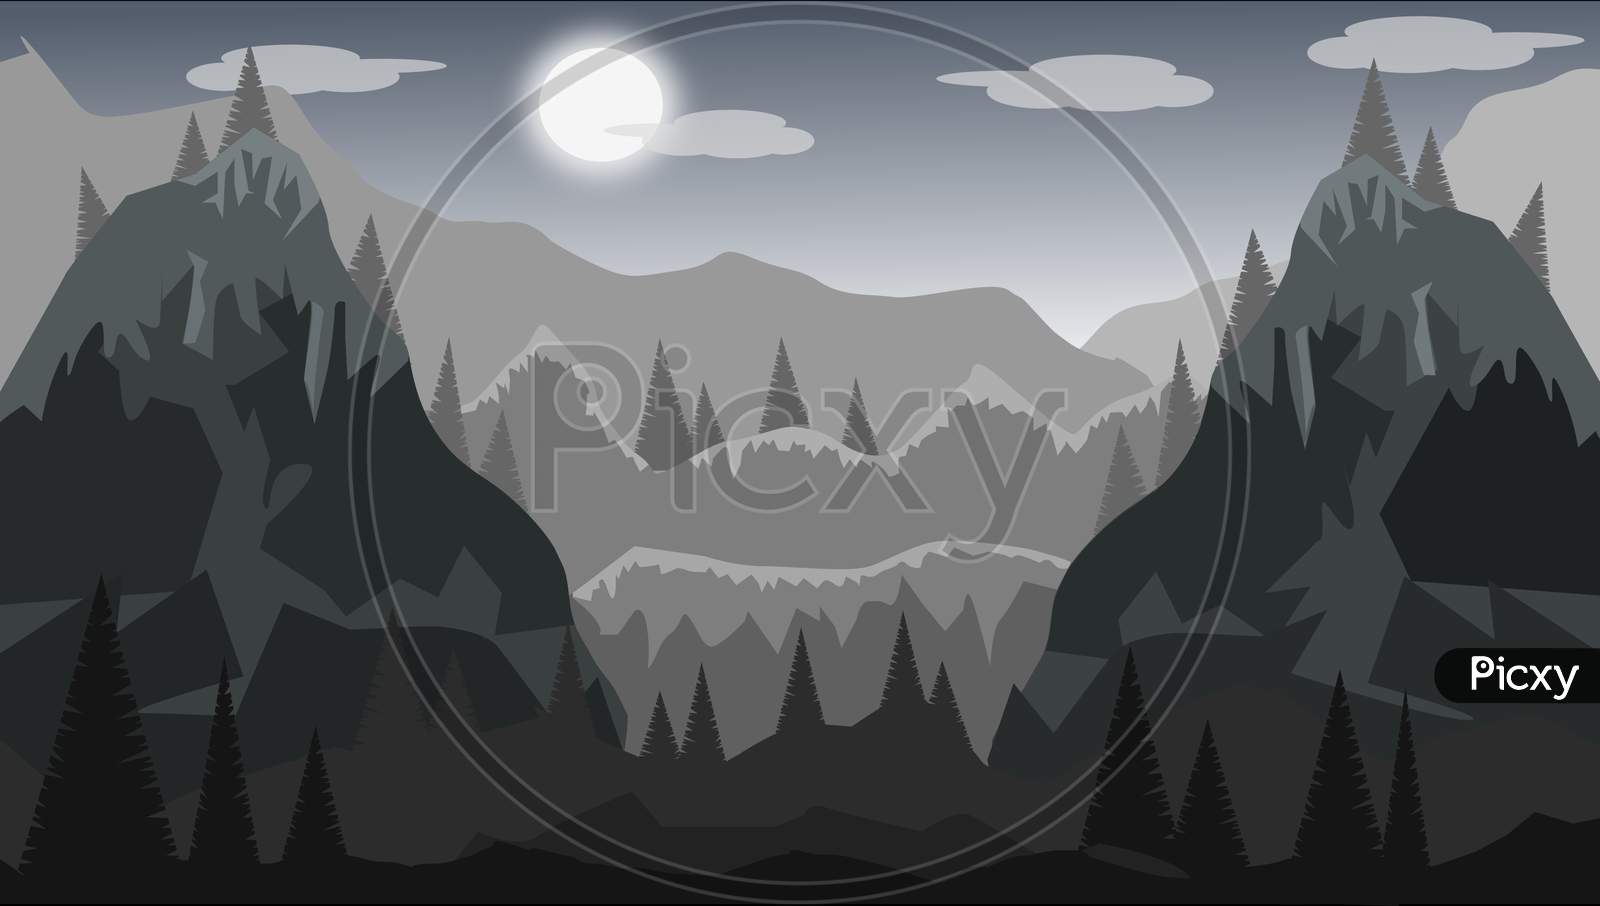 Illustration Graphic Of Night Mountain Landscape Scene With Mountain, Sky, Moon, Cloud And Tree. Night Scenery.